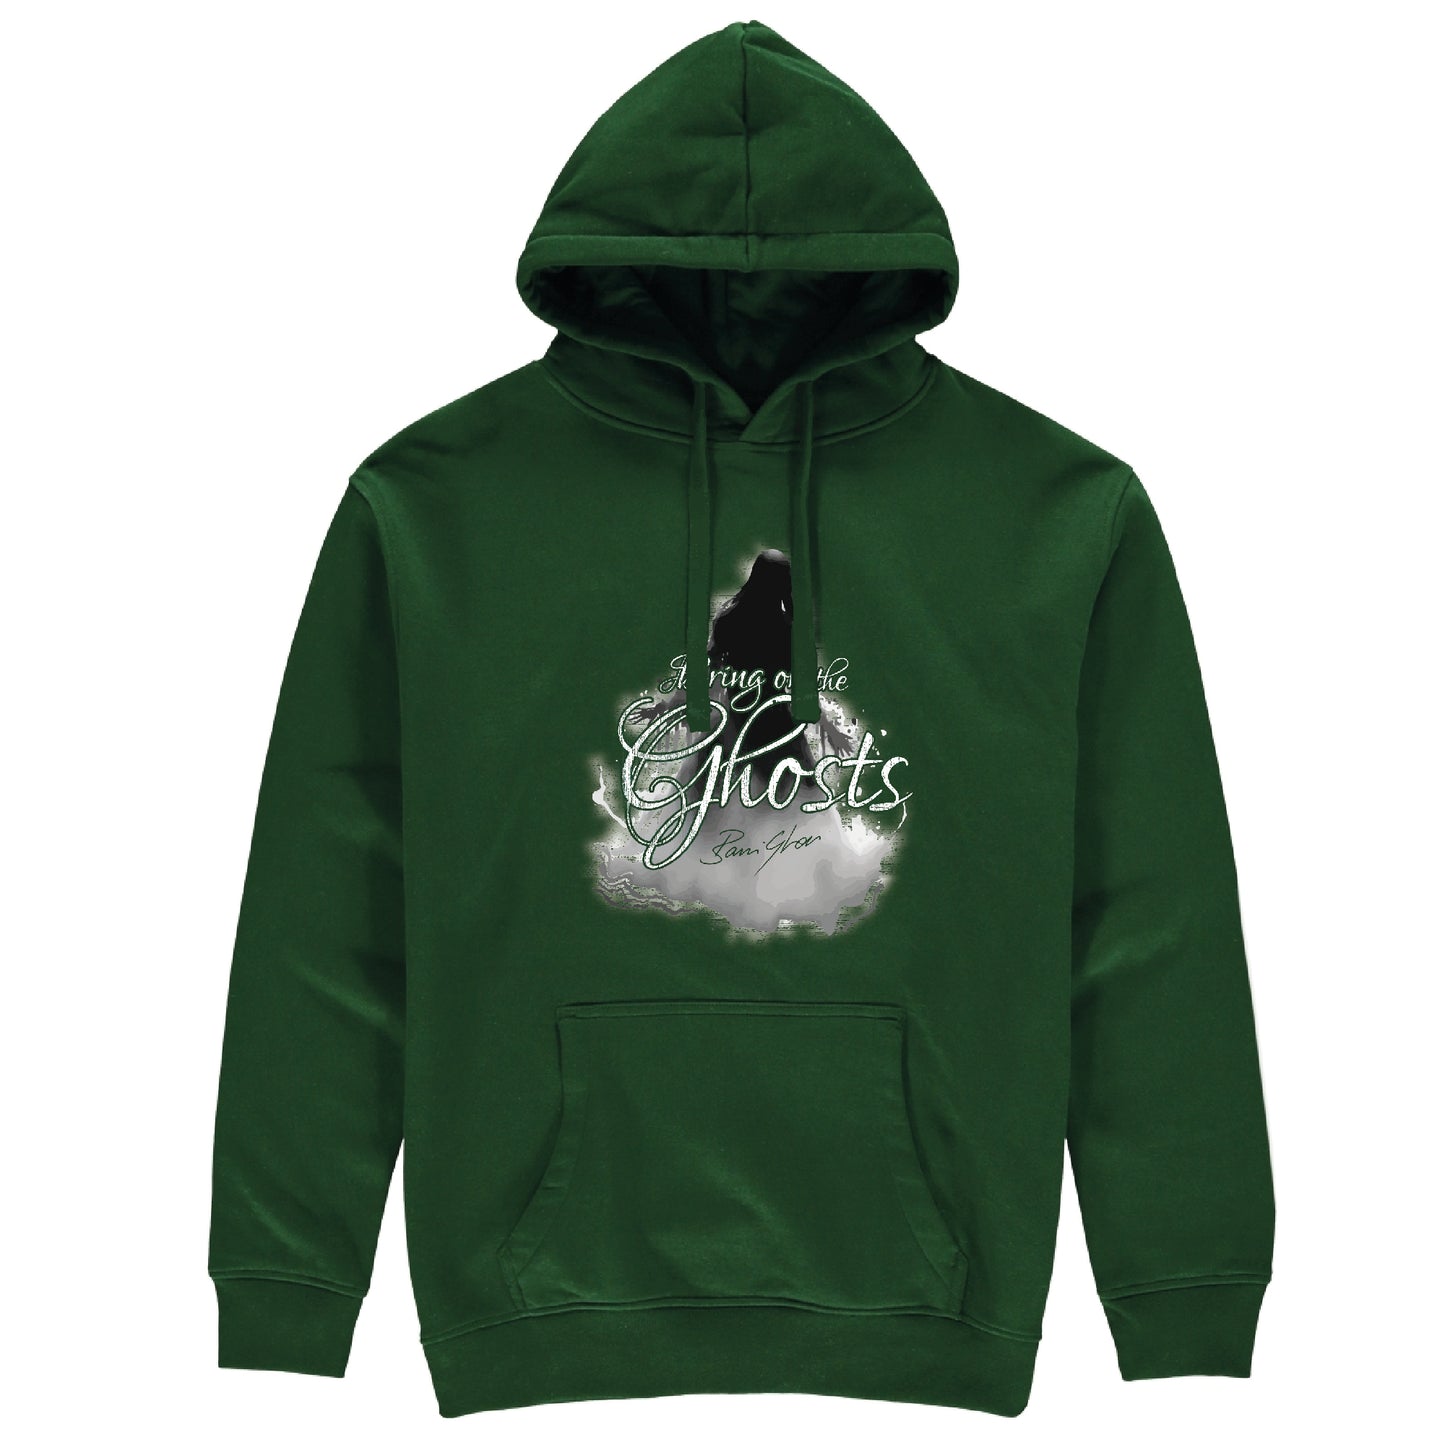 Bring On The Ghosts - Ghostly Apparition Hoodie